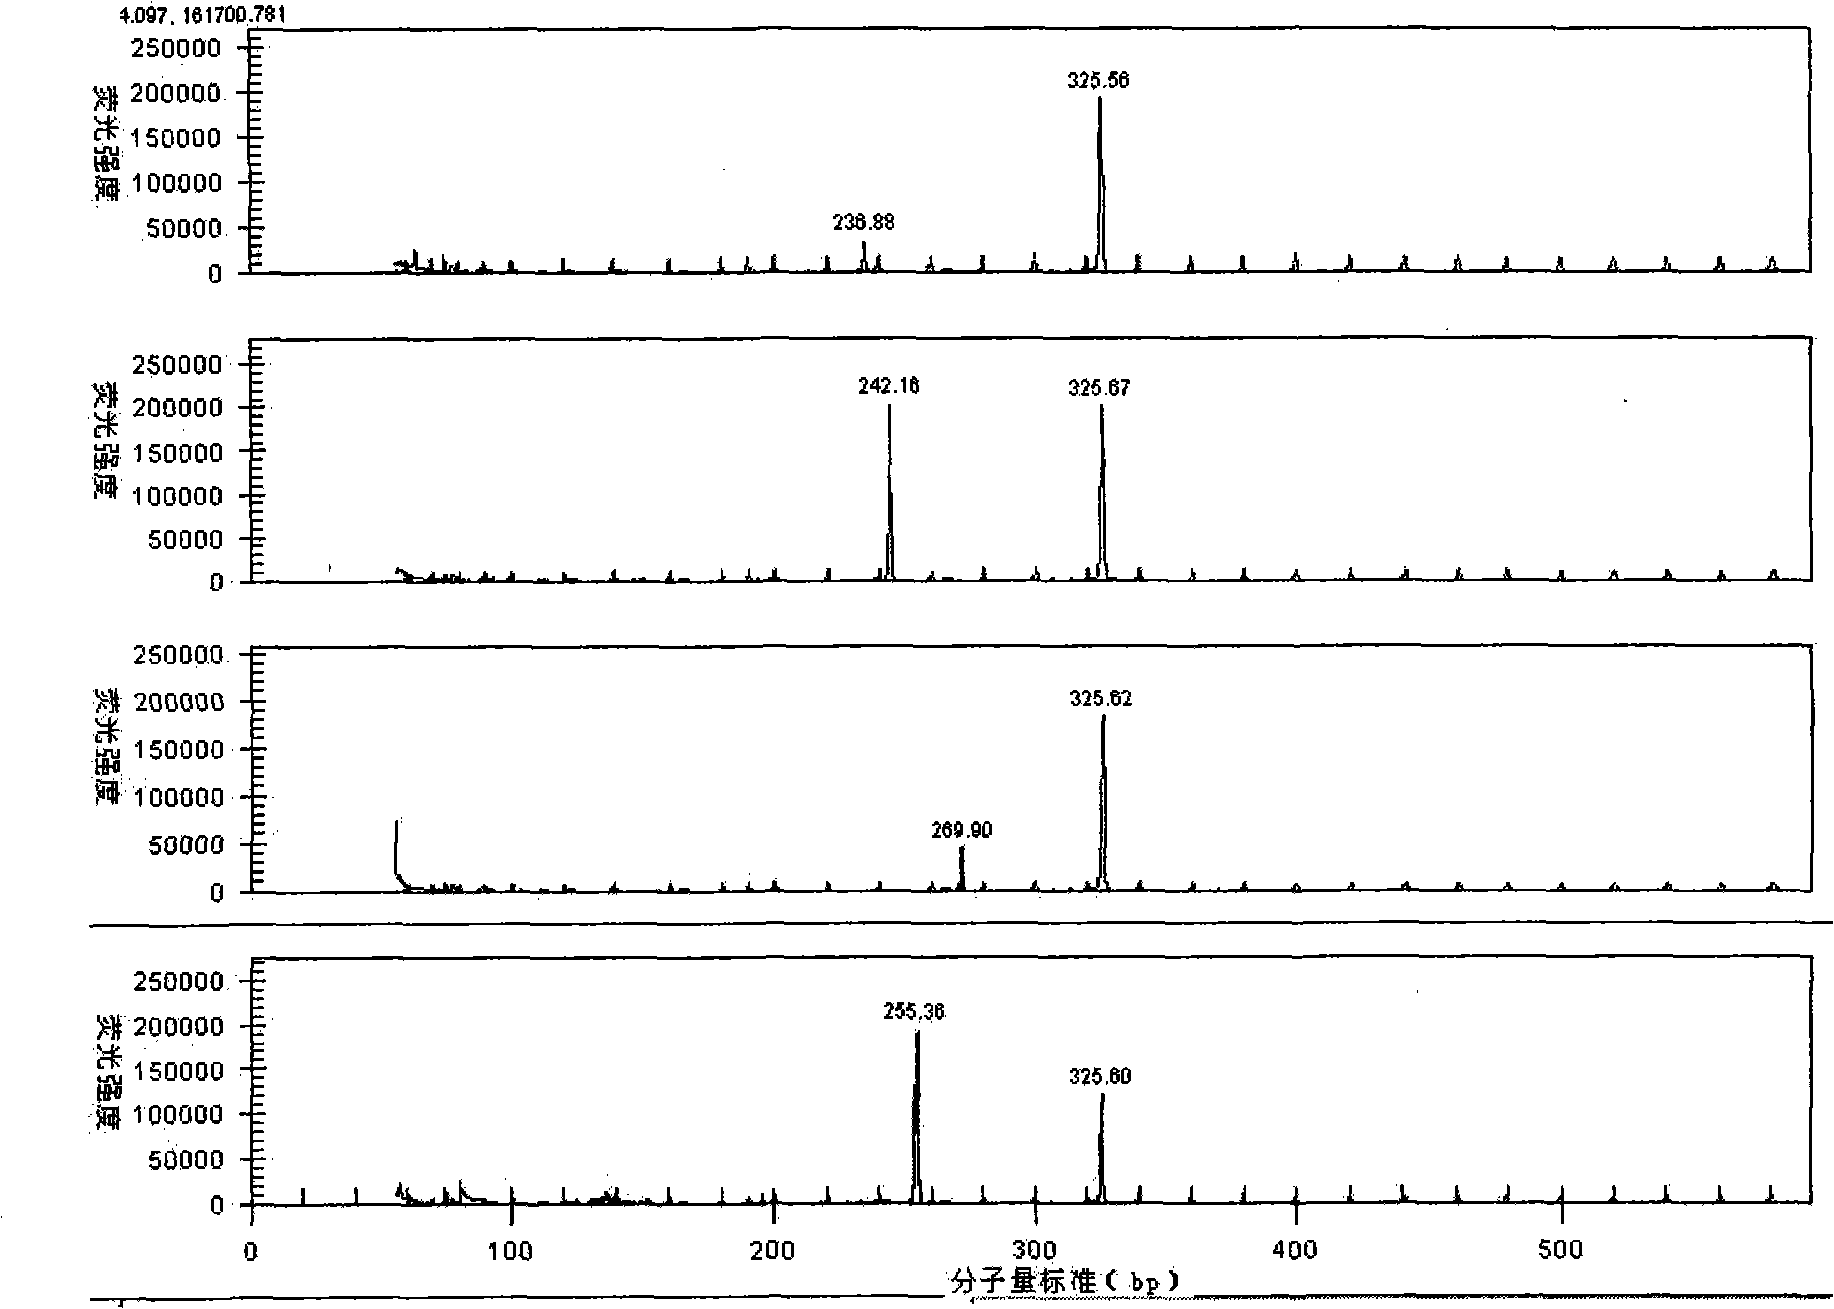 Gene expression method for simultaneously detecting 11 sports-related genes and 4 internal reference genes in human blood